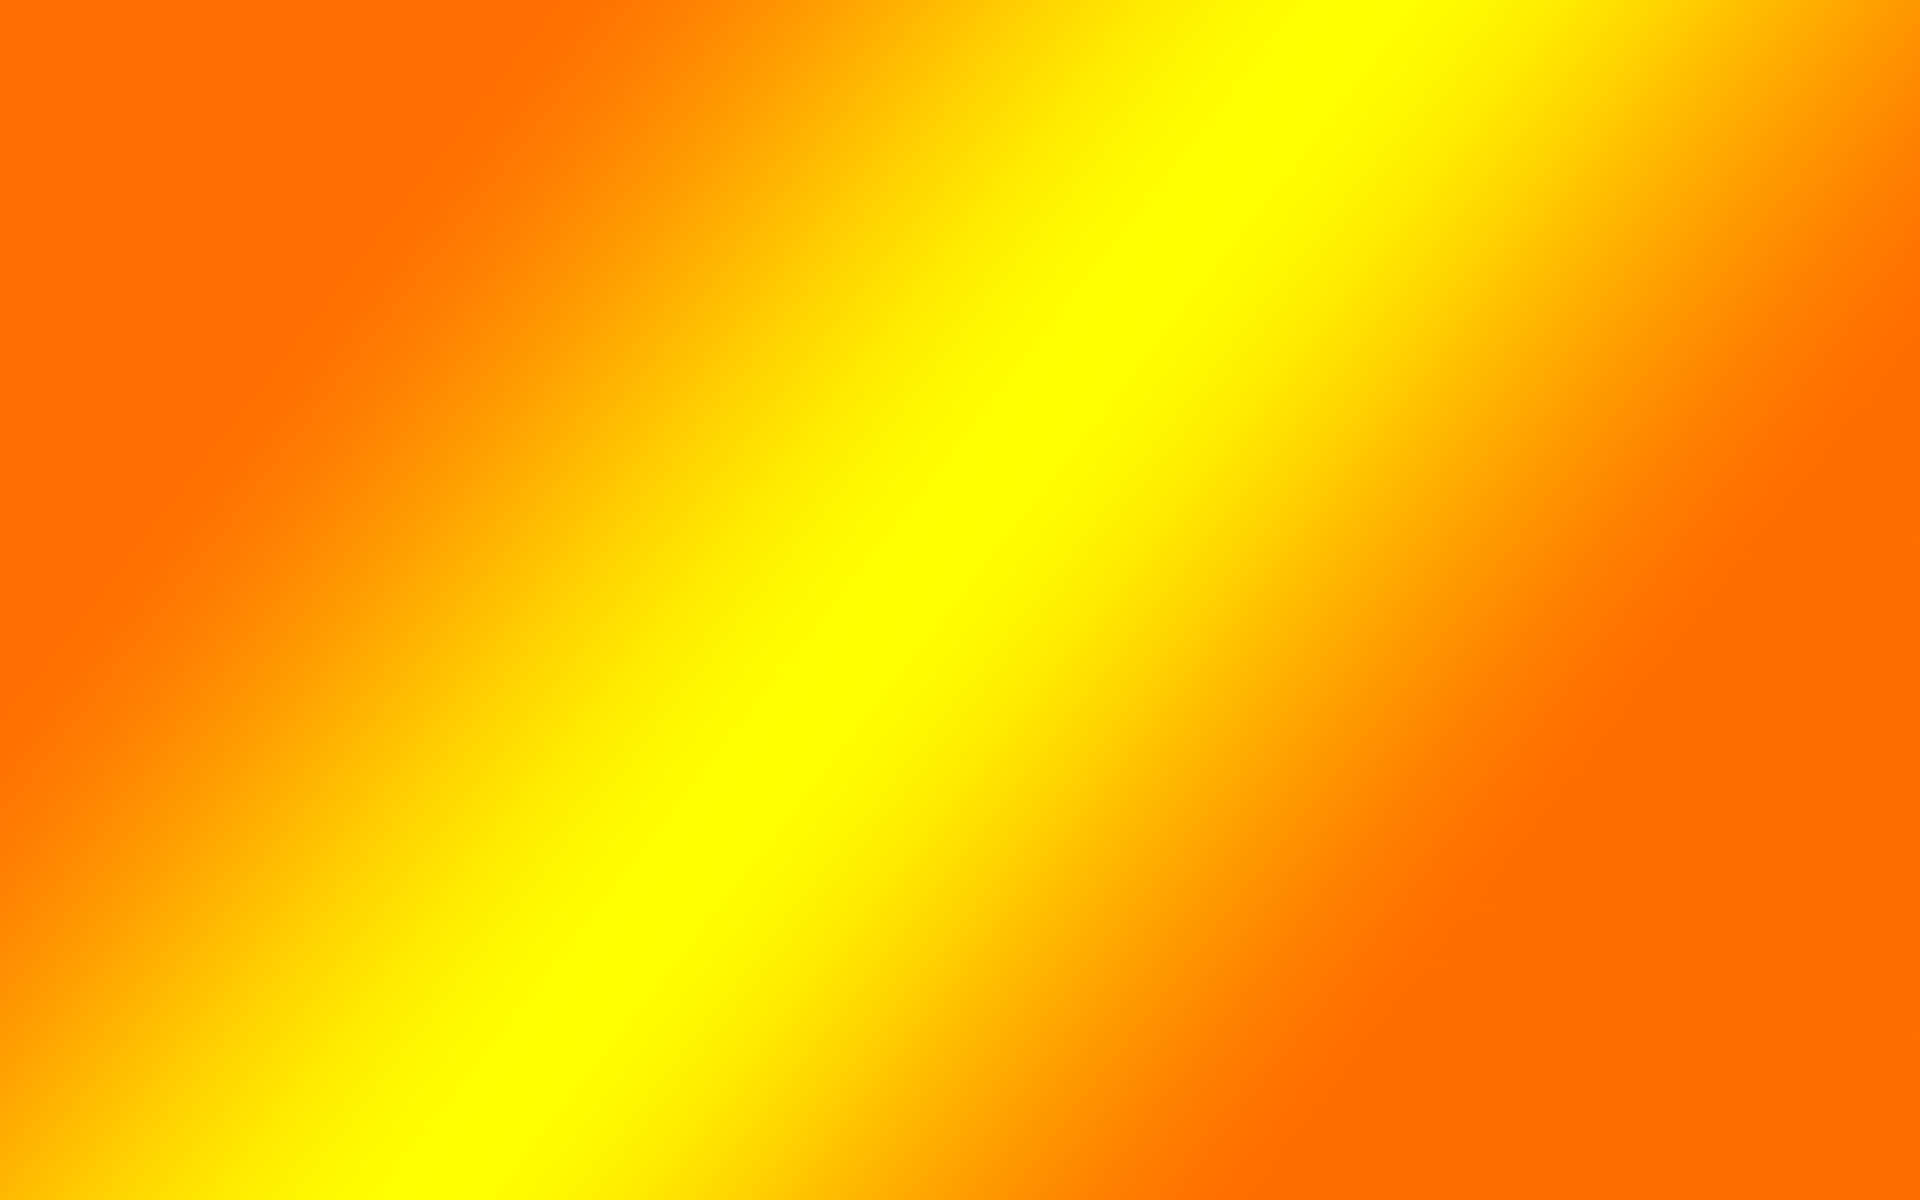 Light Colour Orange And Yellow Gradient Picture